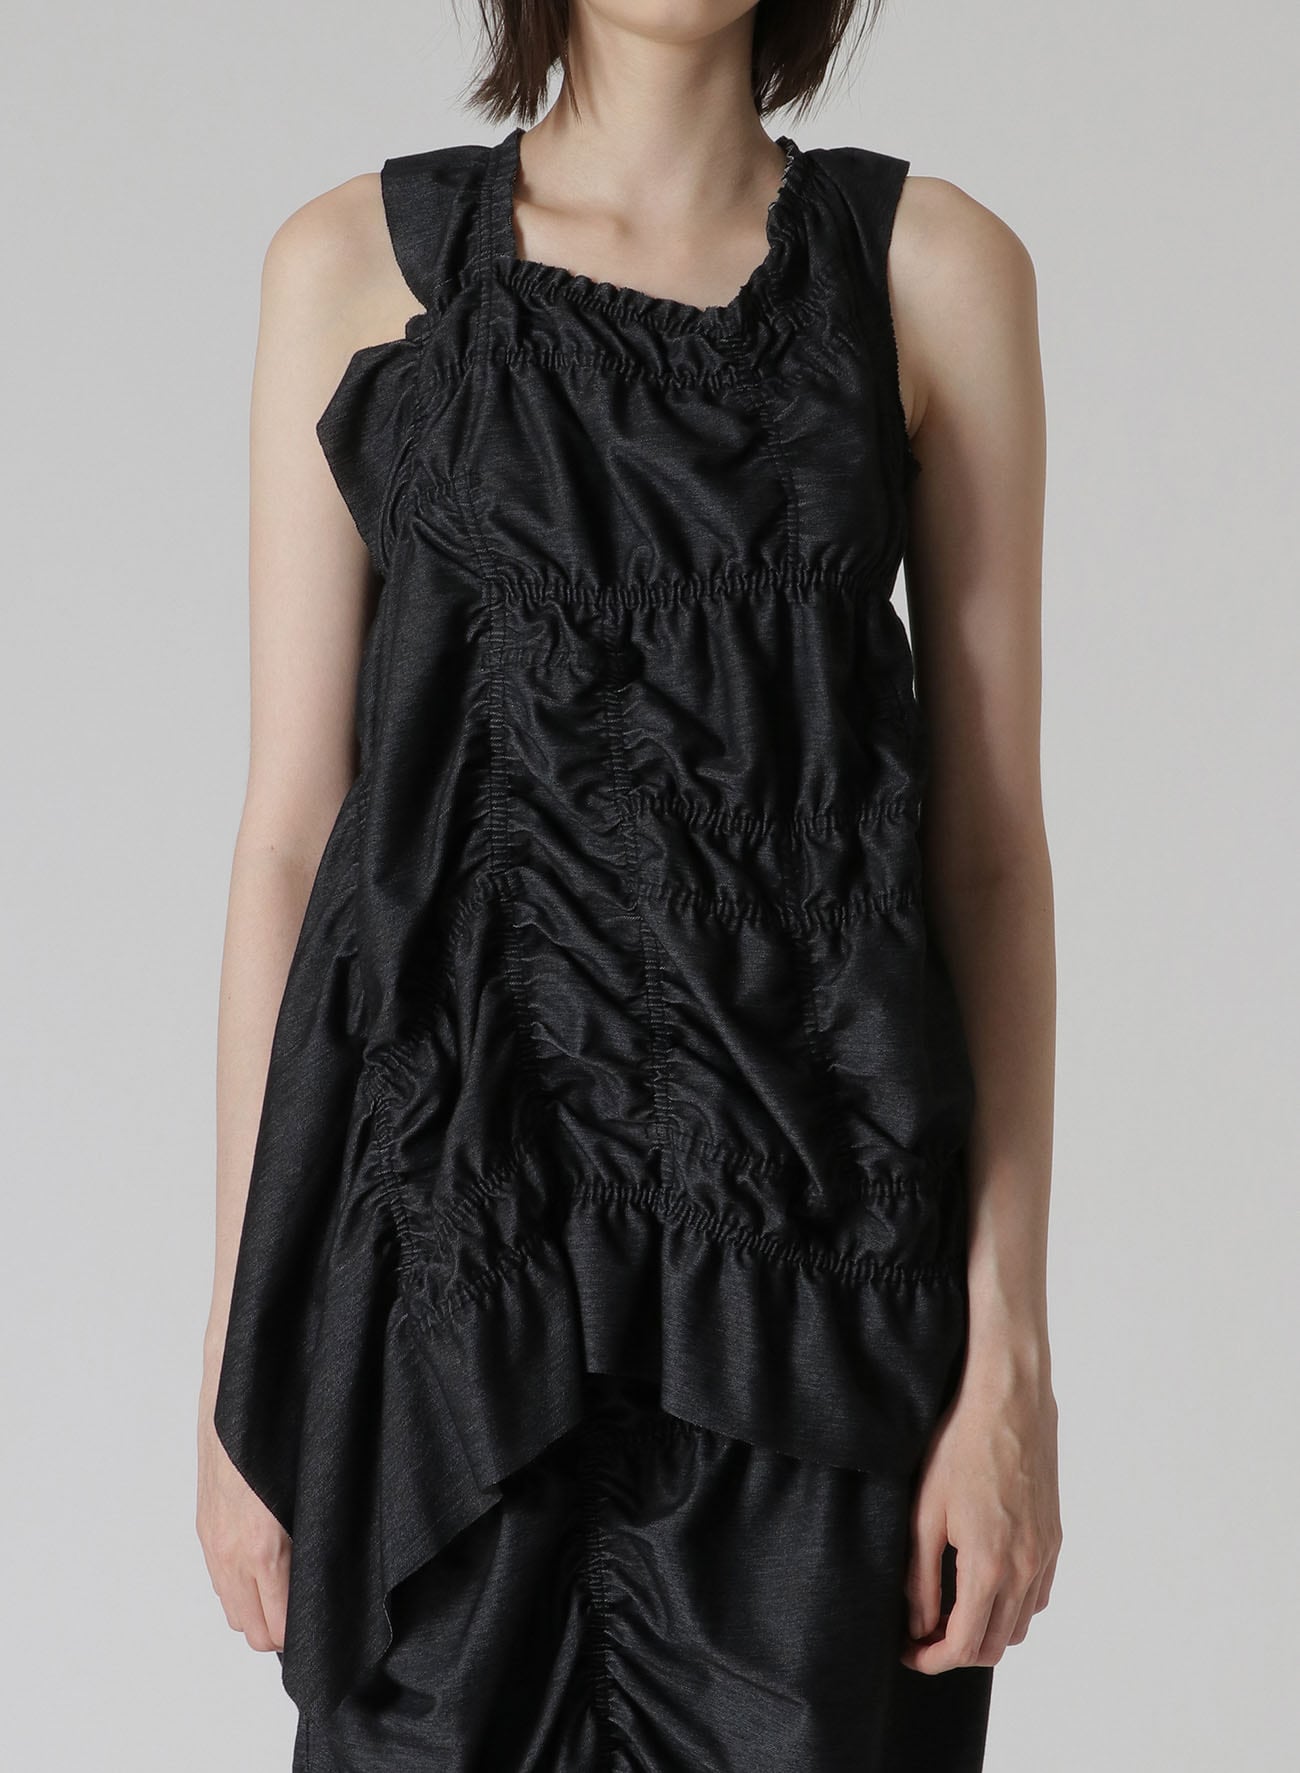 SLEEVELESS TOP WITH SHIRRING DETAILS AND RIGHT DRAPE